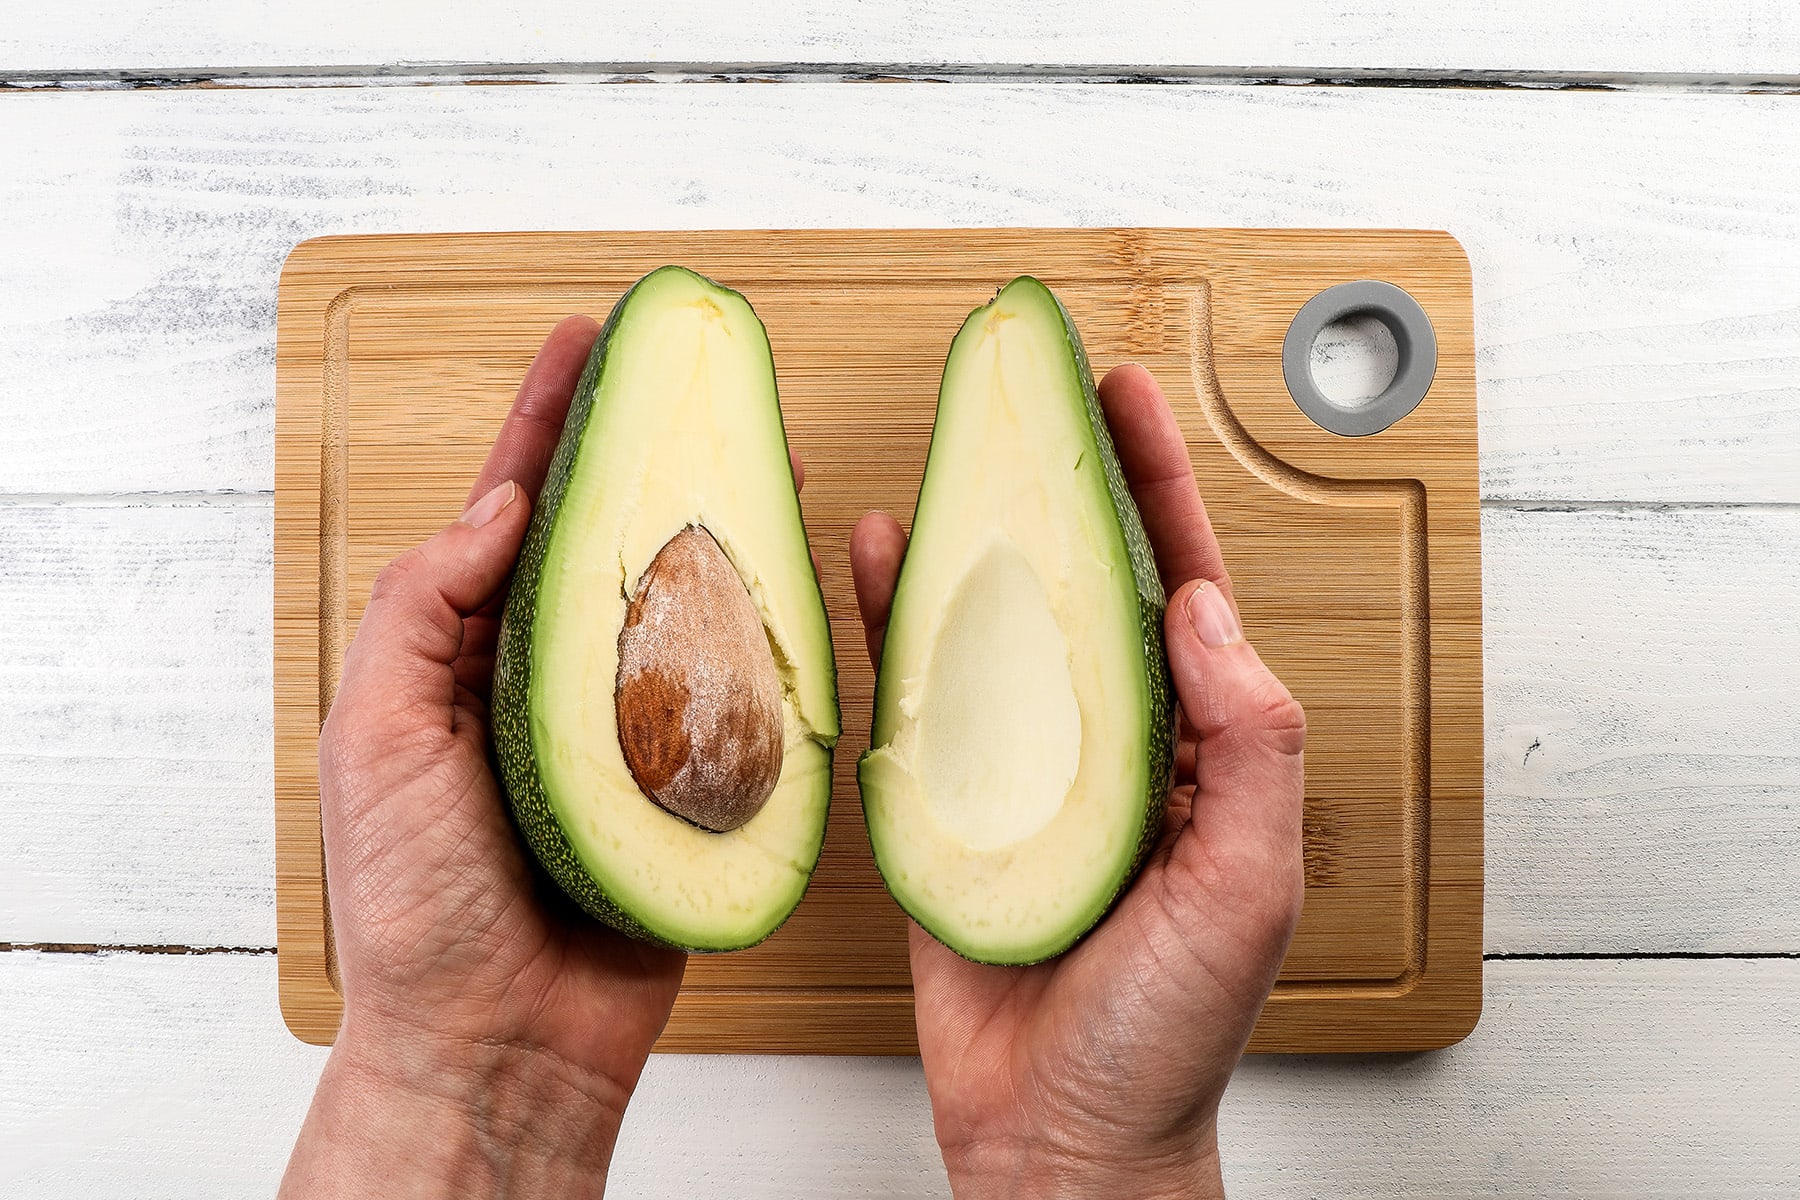 A woman's hands holding two avocado halves over a bamboo cutting board.